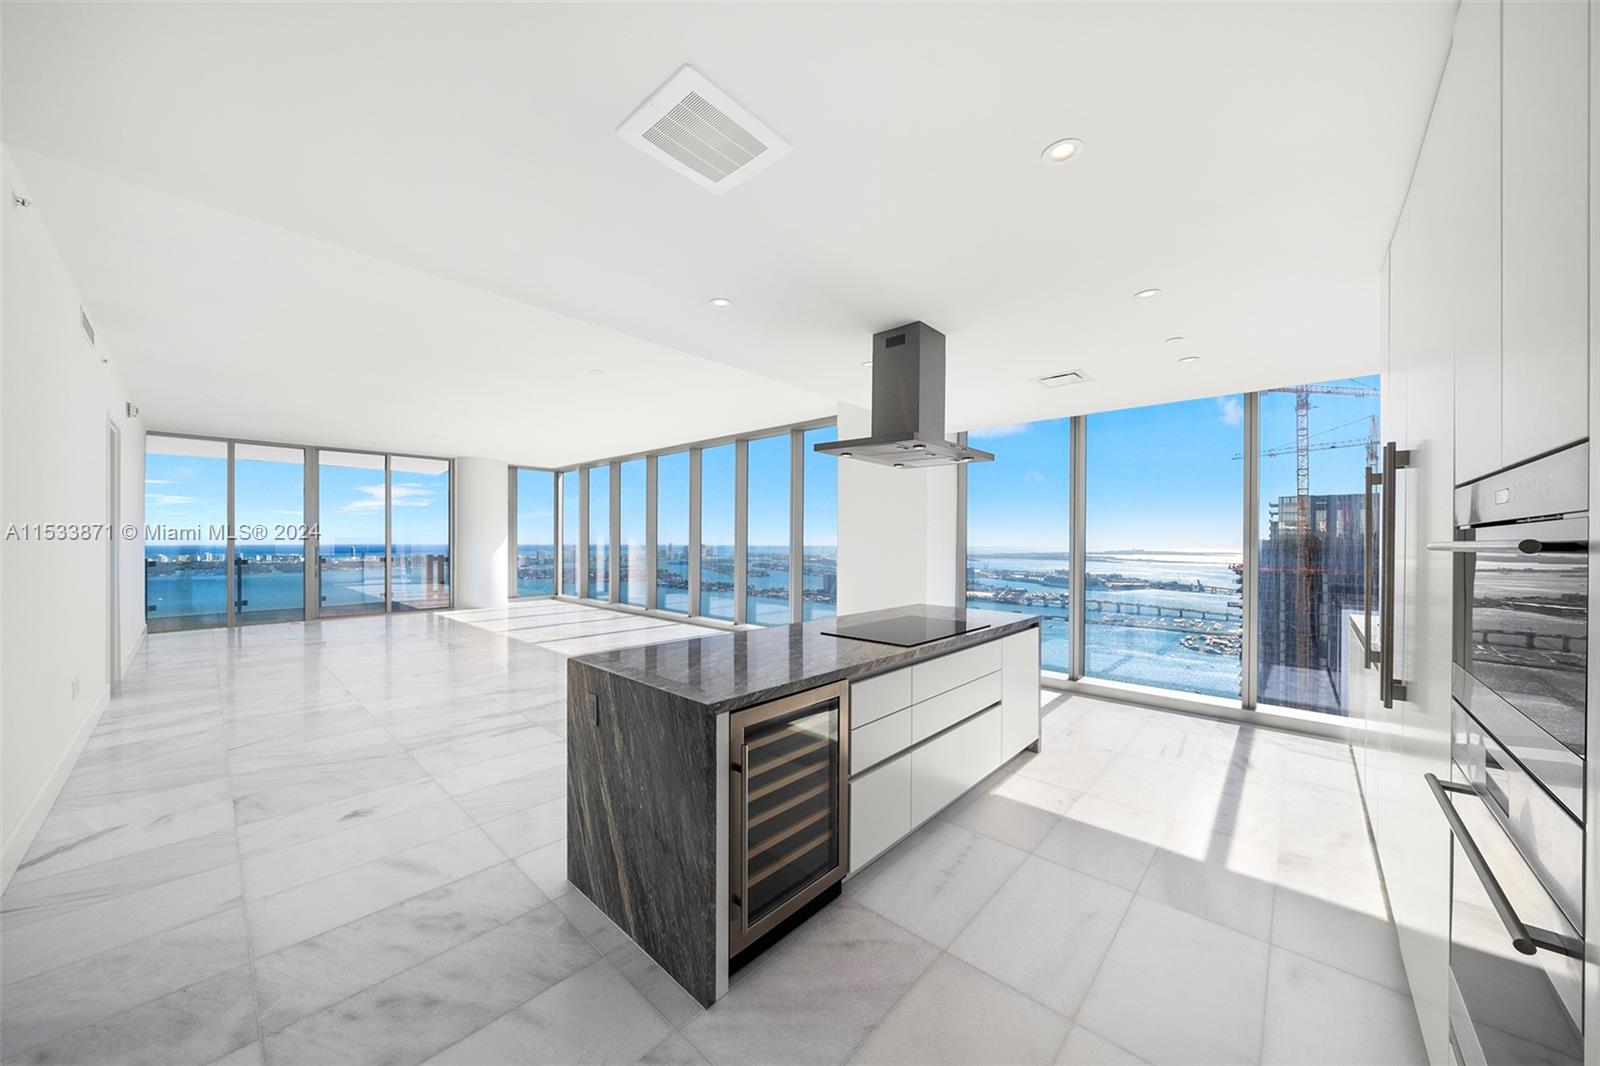 Don't miss out on this incredible opportunity to rent a spacious 4-bedroom/6-bath, high floor unit at Missoni Baia, offering panoramic views of Miami’s skyline. Unit 4803 features 270-degree ocean, bay, and city views, along with a den, a dedicated staff room, and two 10' deep terraces providing the perfect setting to enjoy the stunning views. The flow-through floor plan, marble floors, and 10’ floor-to-ceiling windows create a bright, airy living space. The kitchen boasts WOLF & Sub-Zero appliances and custom-designed Italkraft cabinetry. With private elevator access, two reserved parking spaces, world-class amenities, and a prime location just minutes away from the Design District, Miami Beach, Downtown, and Brickell, Missoni stands as Miami’s newest move-in-ready new development.